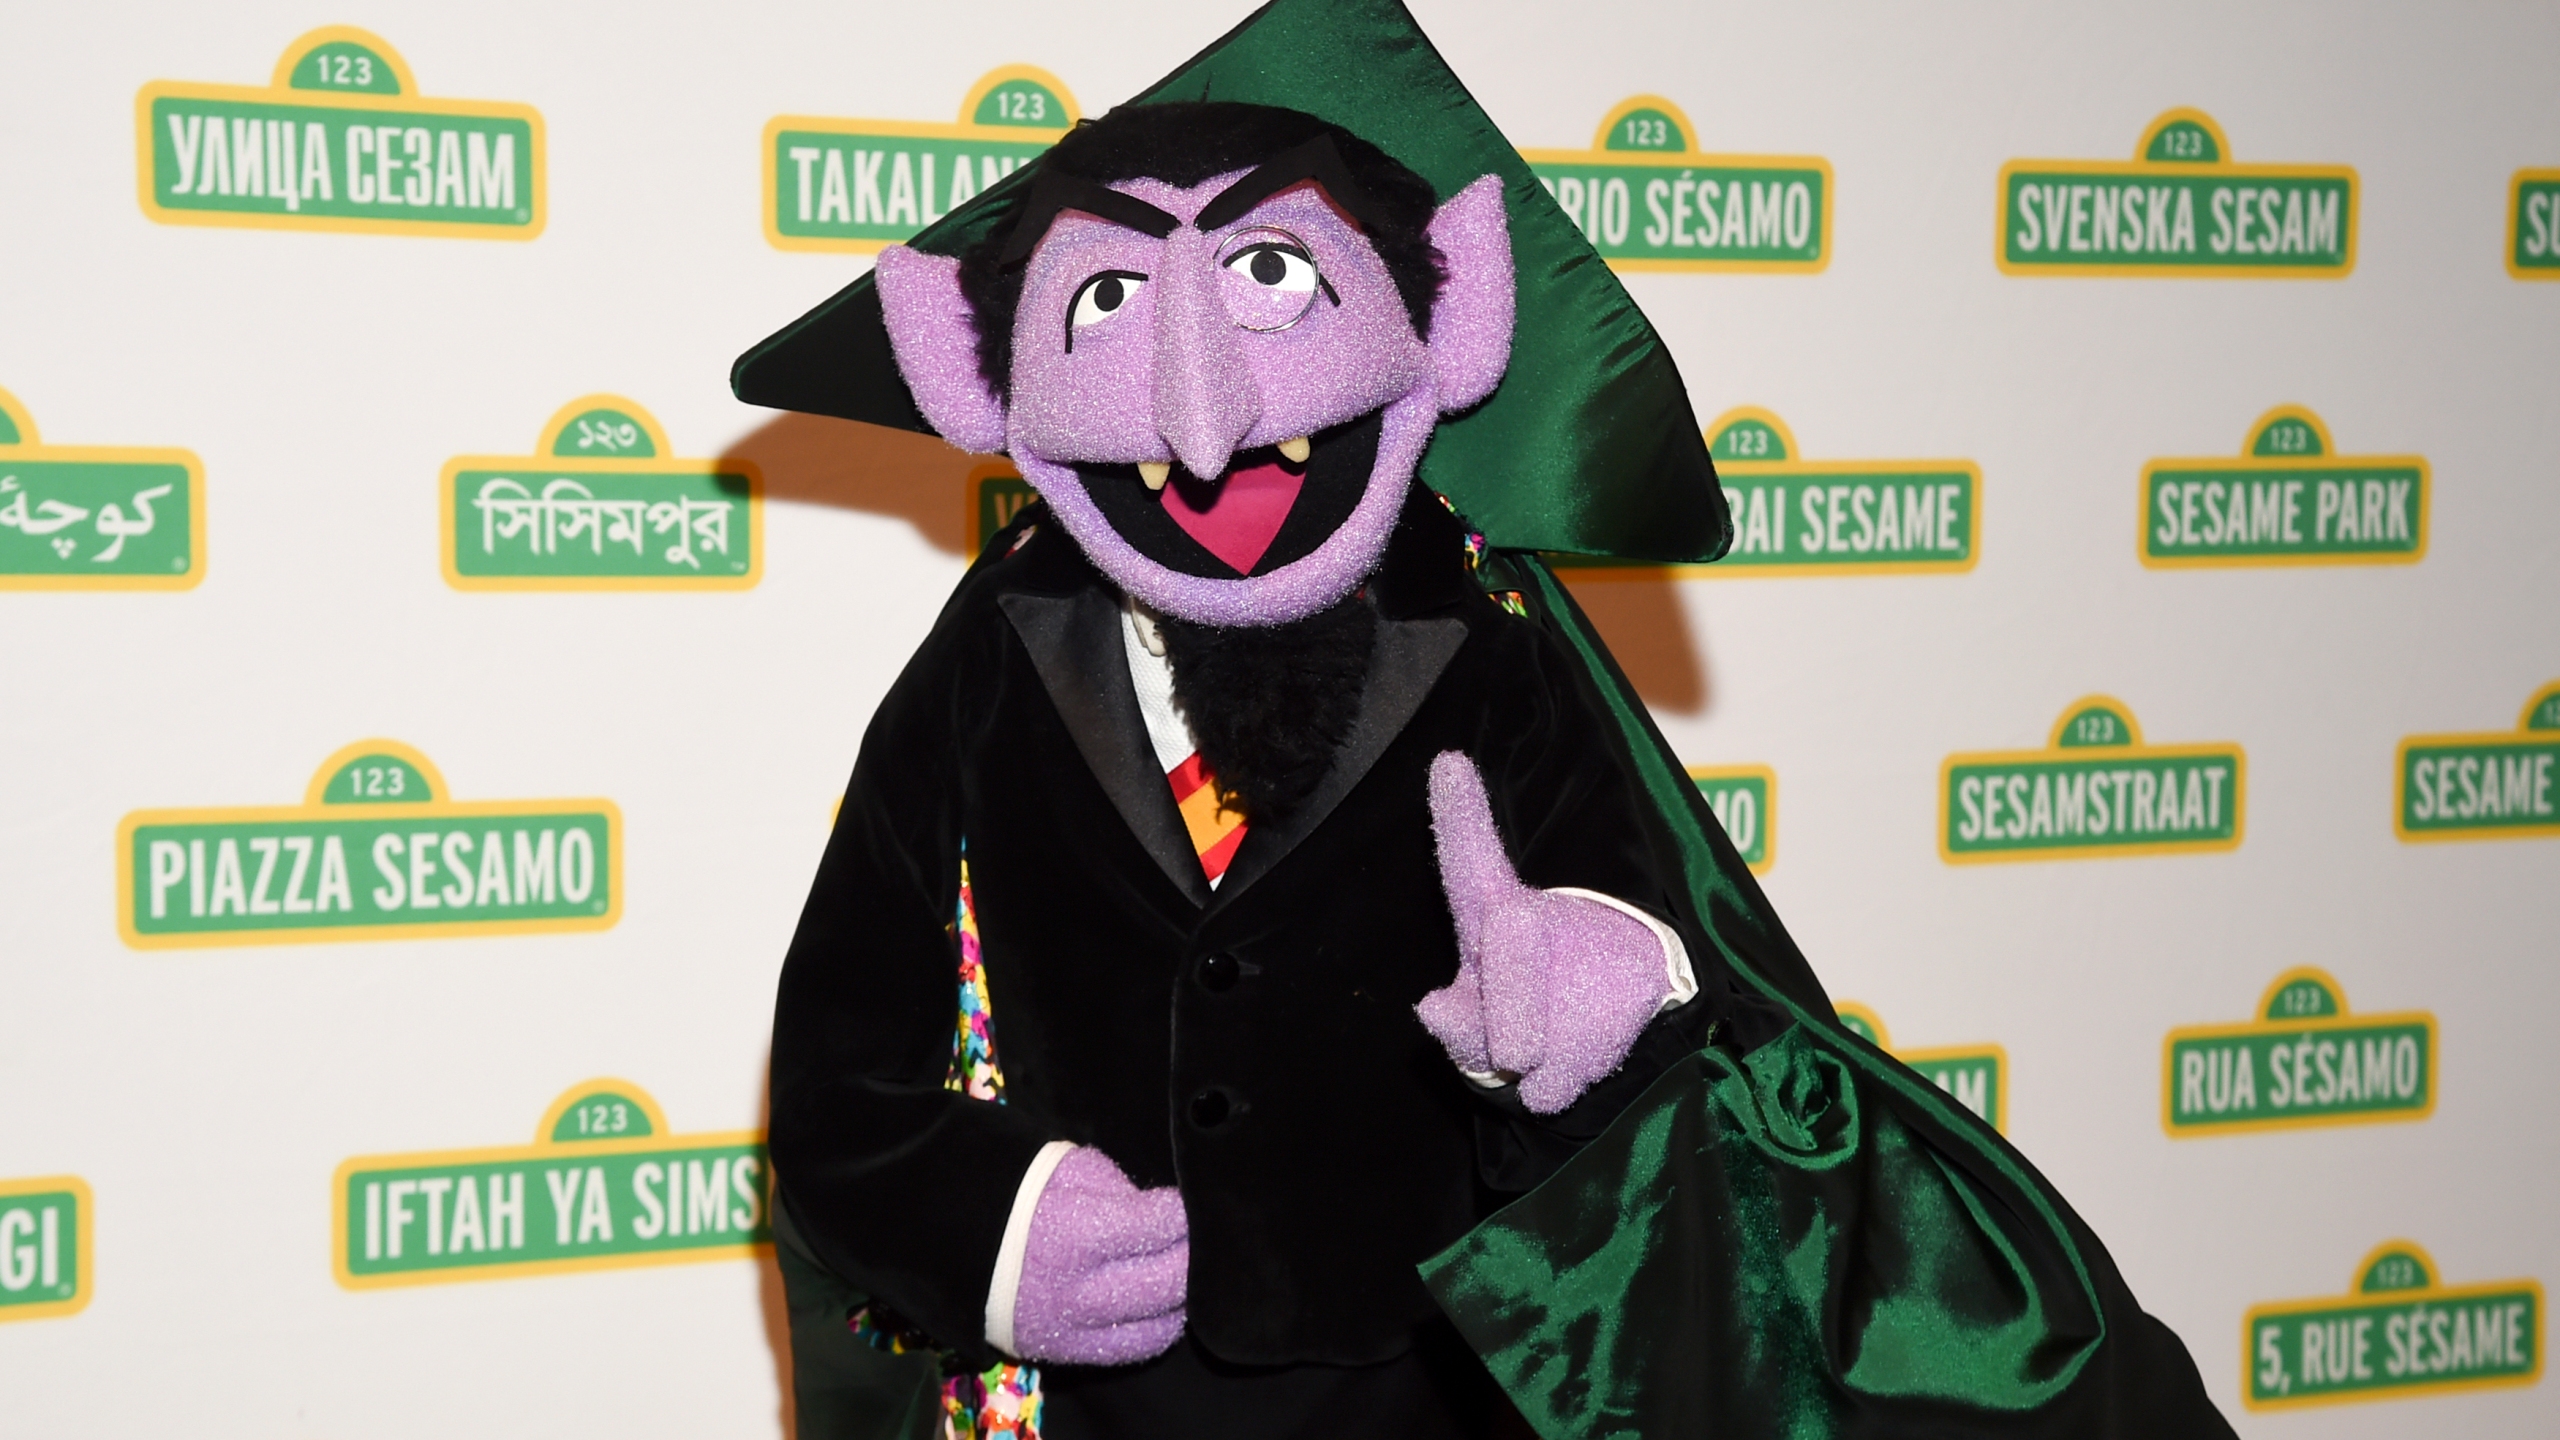 Sesame's Count wants to get young children counted in census